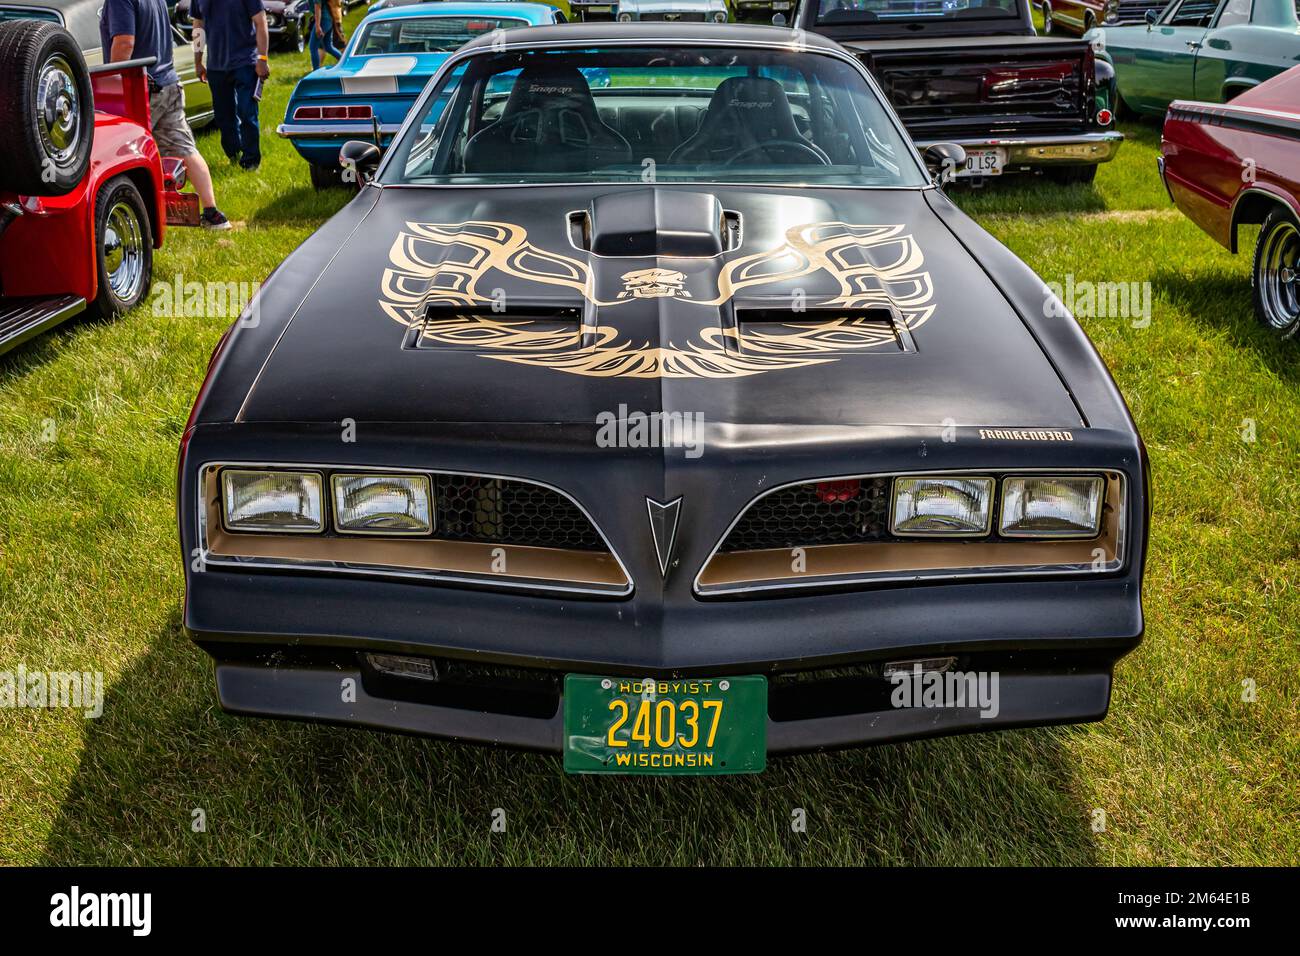 Iola, WI - July 07, 2022: High perspective front view of a 1977 Pontiac Firebird Trans Am at a local car show. Stock Photo